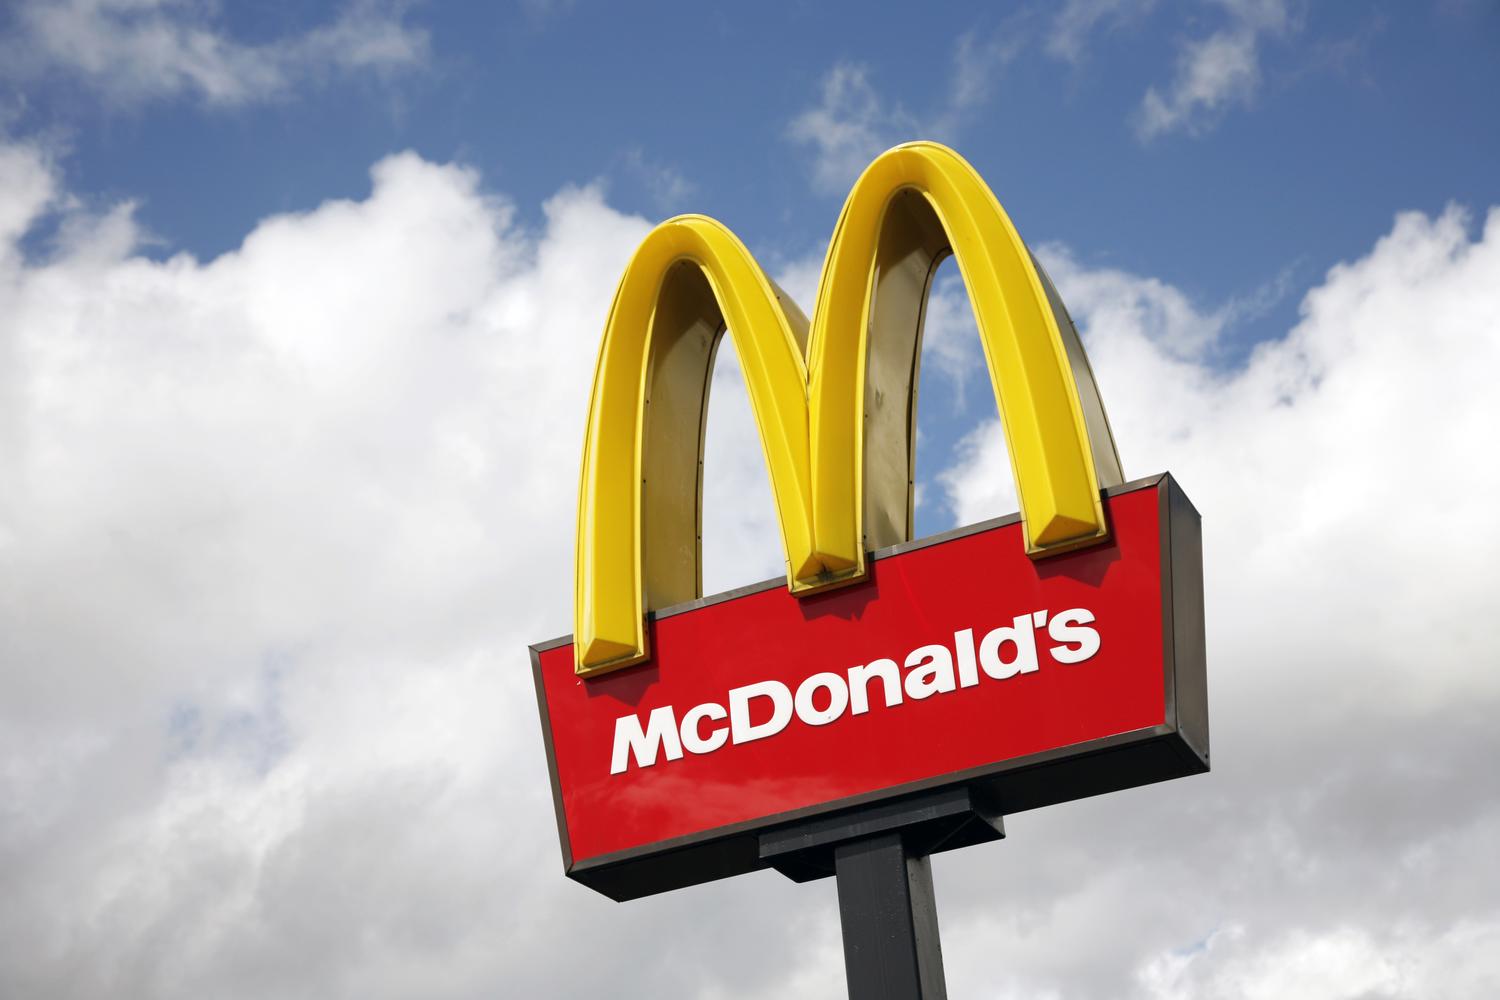 Retro Report The True Story Behind the Spilled McDonald's Coffee